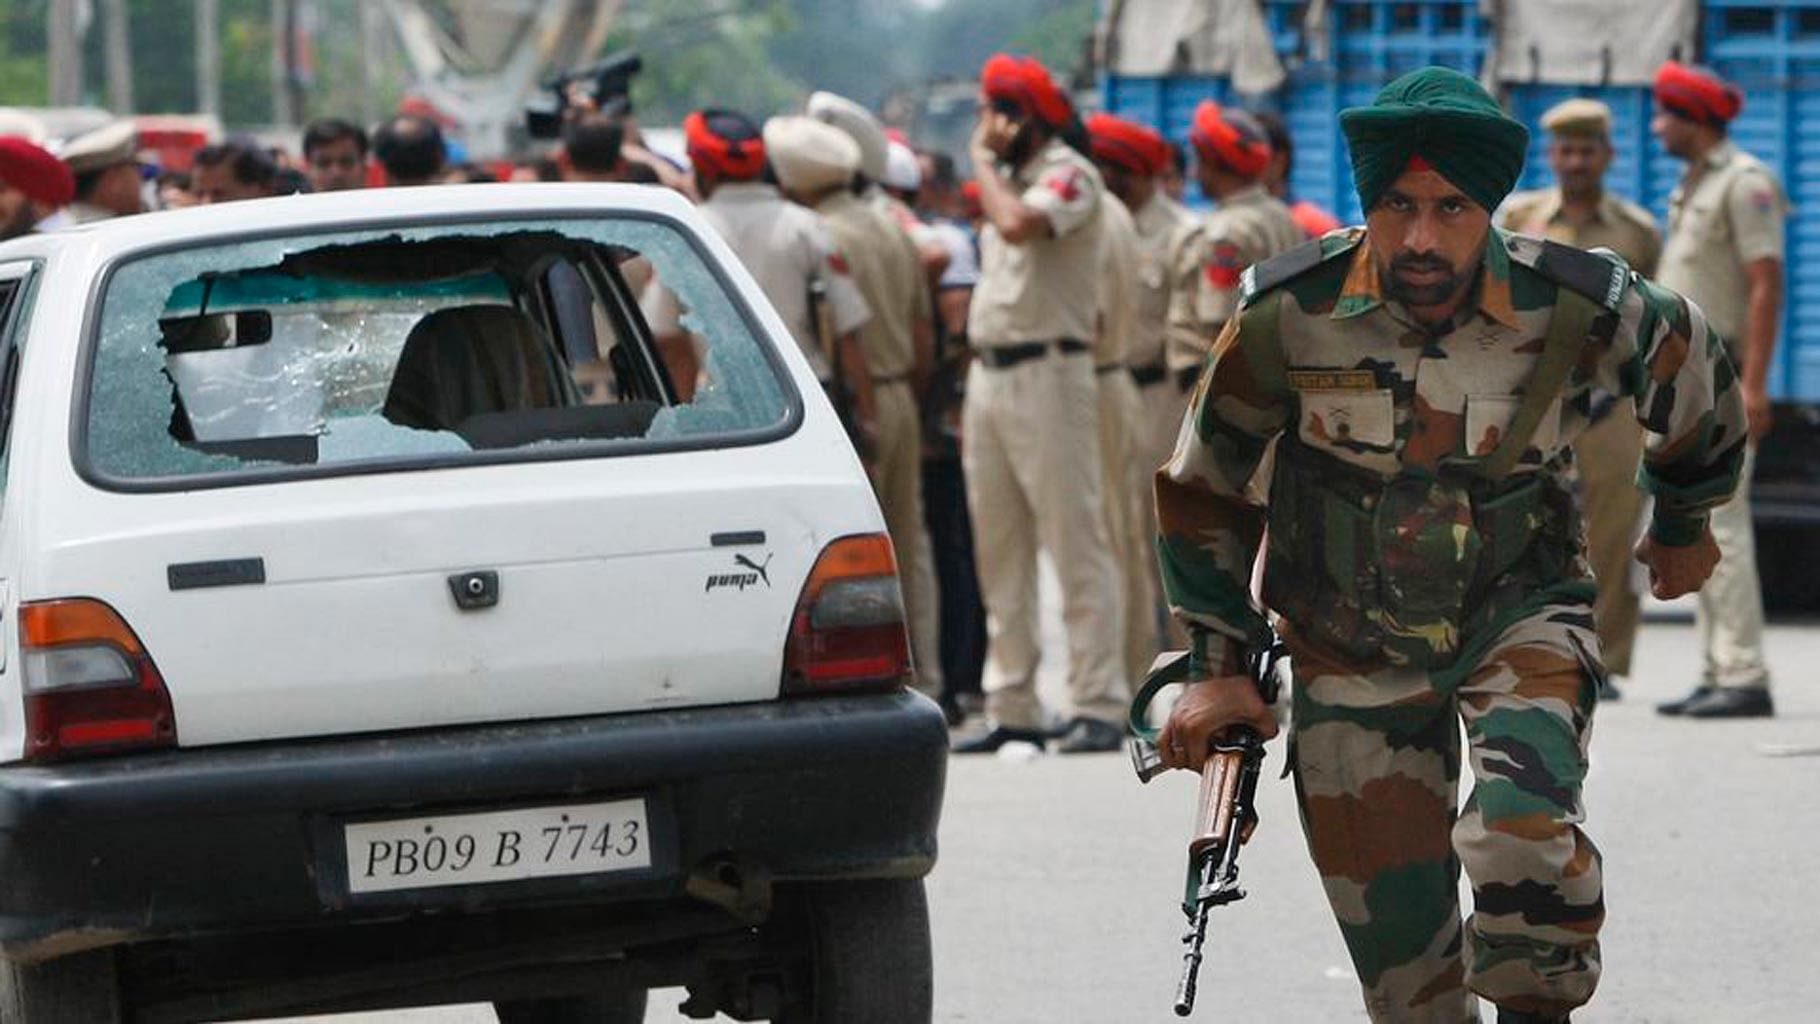 Security personnel in Dinanagar, Punjab during the terror attack in July 2015. (Photo: PTI)